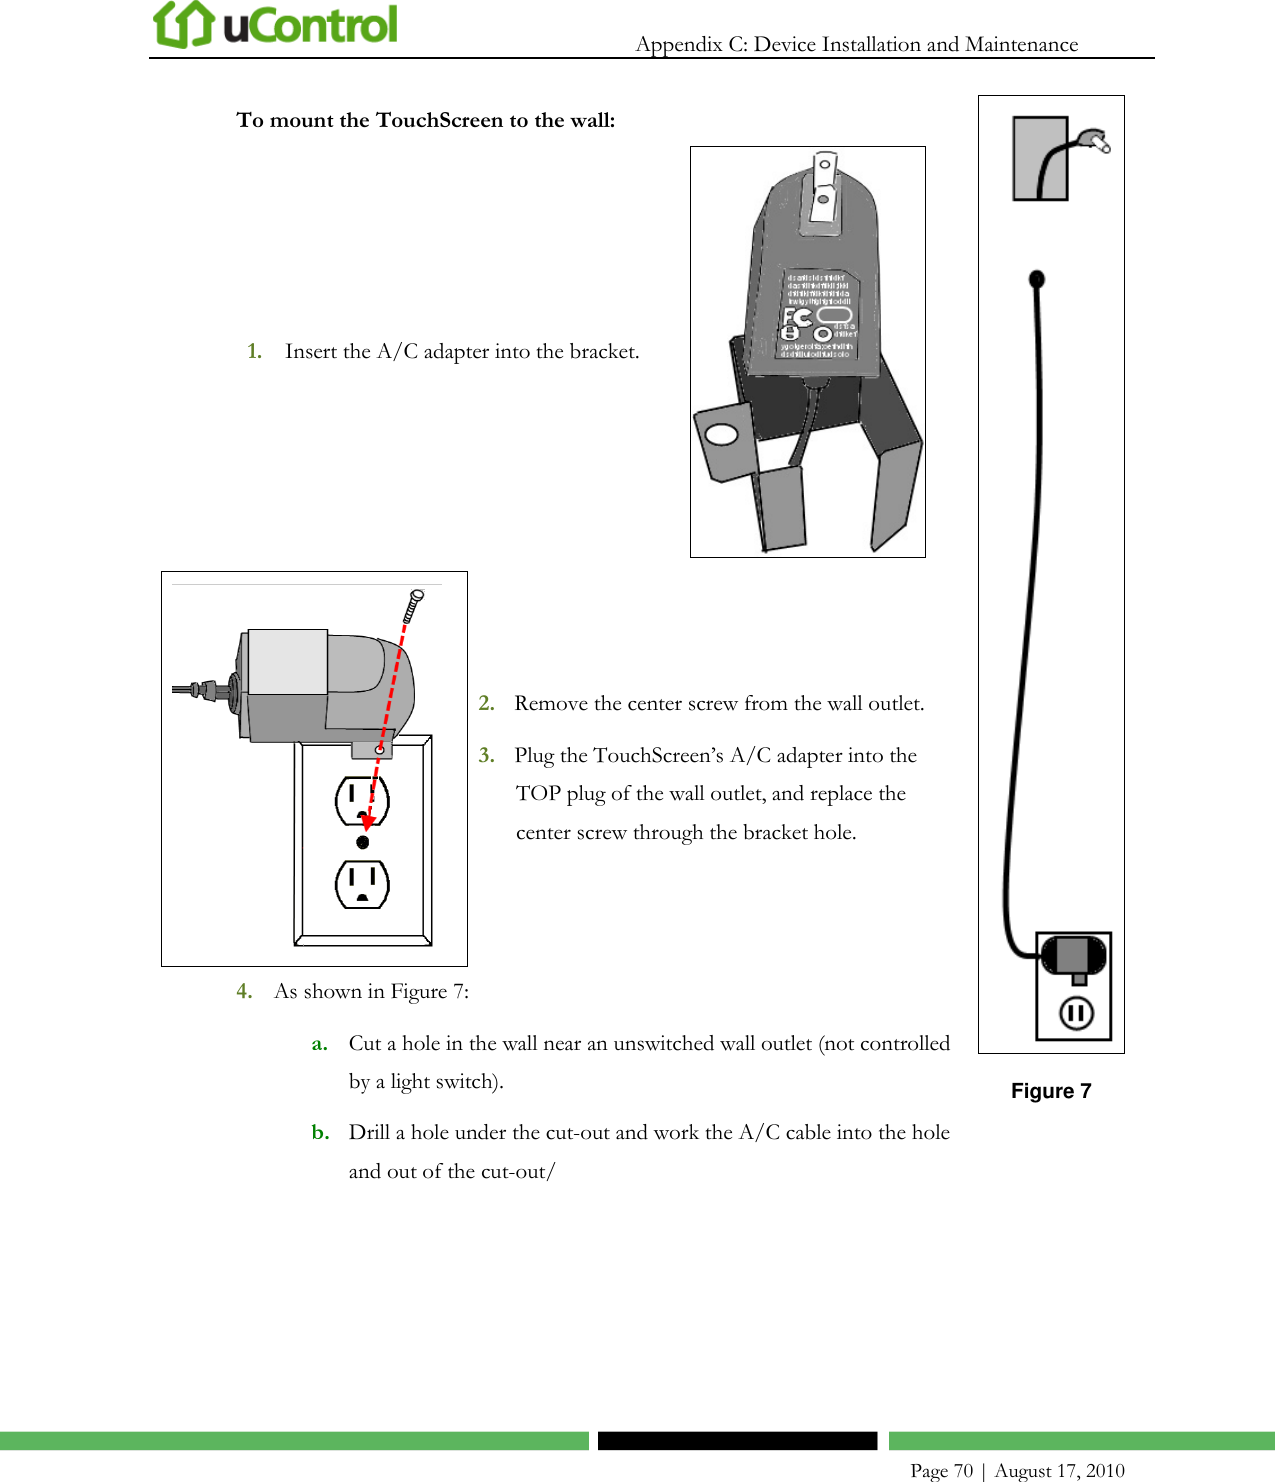   Appendix C: Device Installation and Maintenance    Page 70 | August 17, 2010 To mount the TouchScreen to the wall: 1. Insert the A/C adapter into the bracket.    2. Remove the center screw from the wall outlet. 3. Plug the TouchScreen’s A/C adapter into the TOP plug of the wall outlet, and replace the center screw through the bracket hole. 4. As shown in Figure 7: a. Cut a hole in the wall near an unswitched wall outlet (not controlled by a light switch). b. Drill a hole under the cut-out and work the A/C cable into the hole and out of the cut-out/  Figure 7  